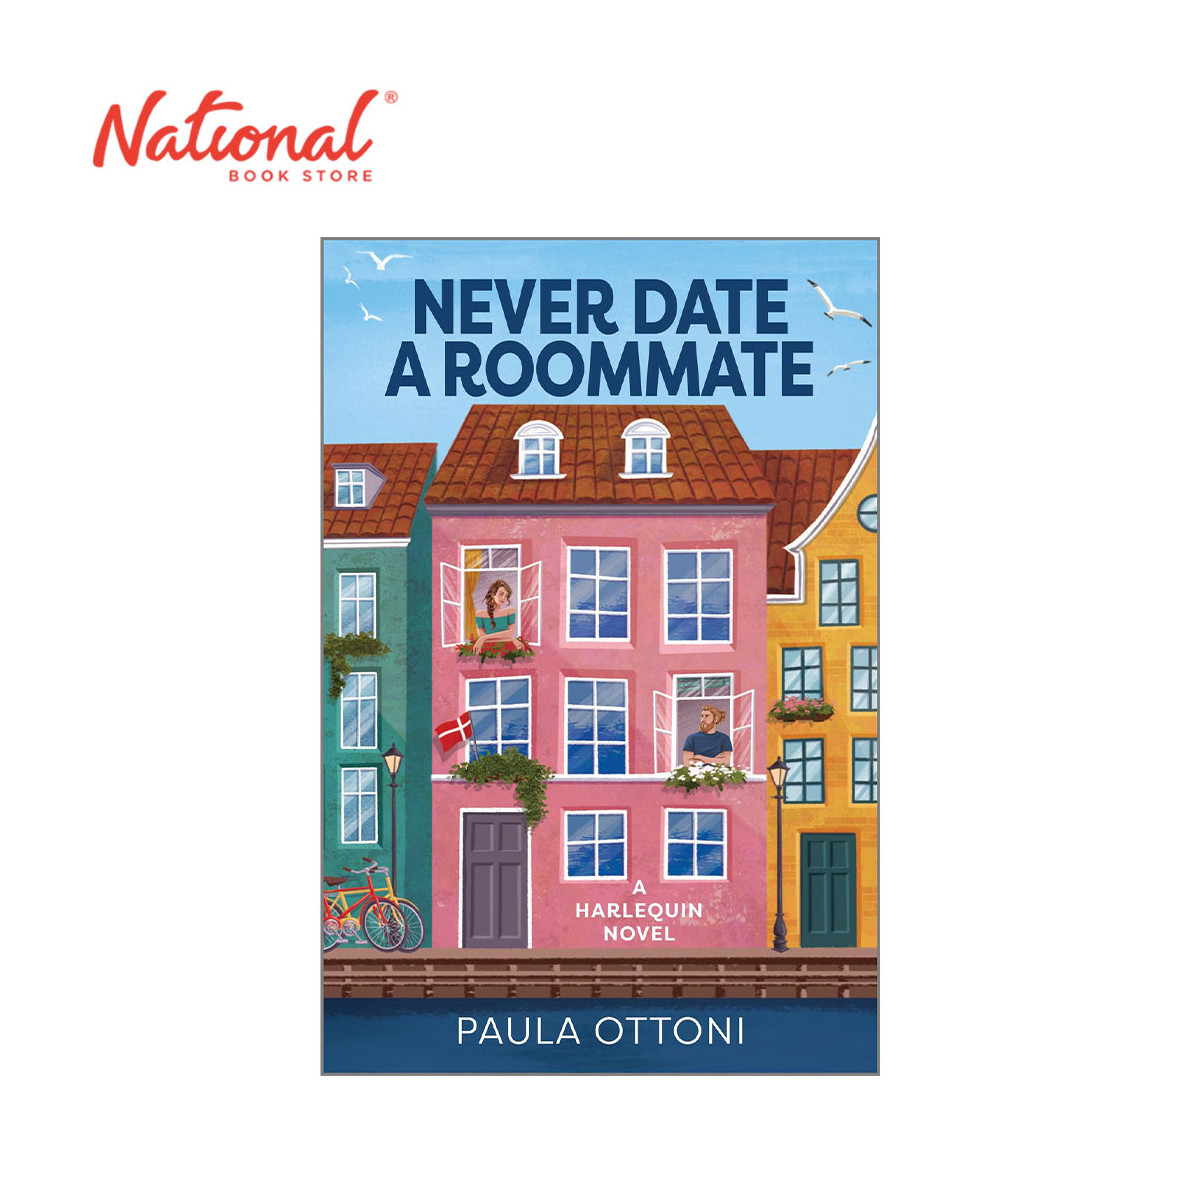 *PRE-ORDER* Never Date A Roommate Trade Paperback by Ottoni Paula - Trade Paperback - Romance Fiction